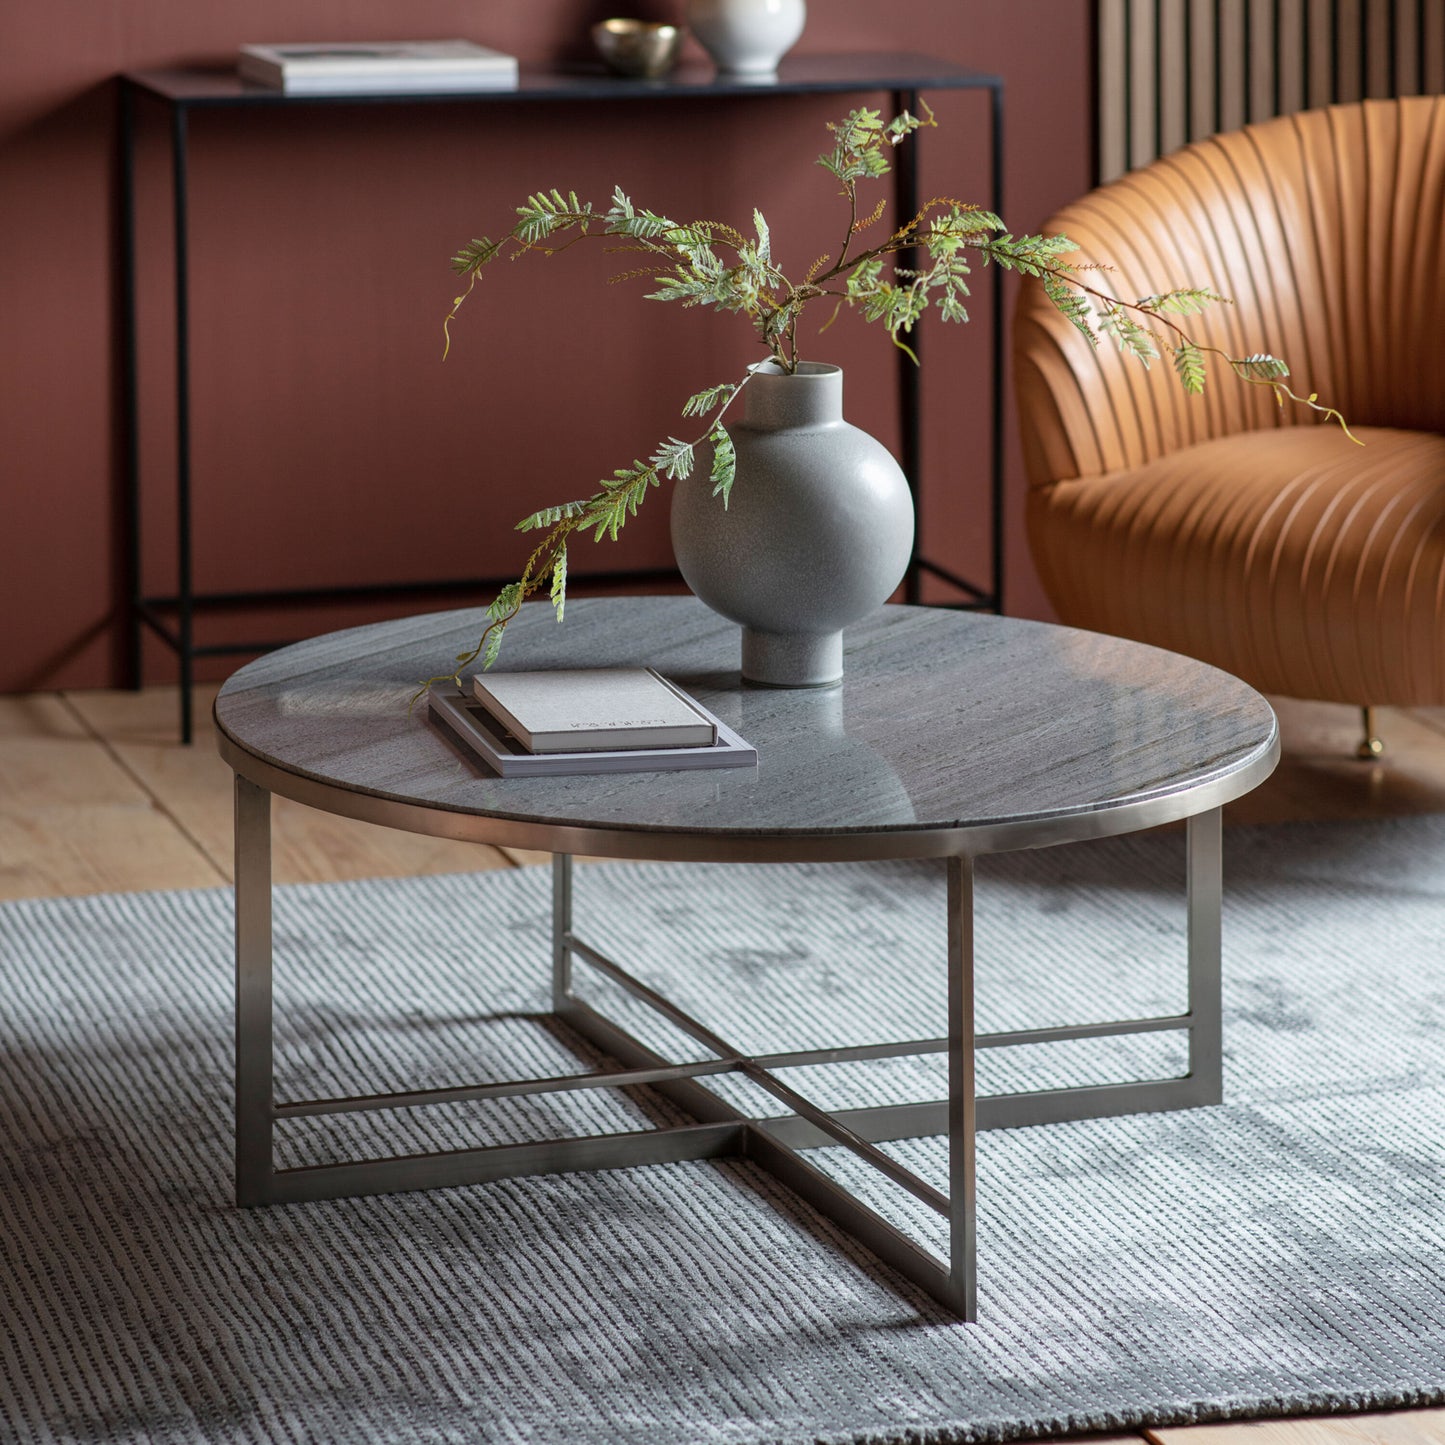 Black Marble and Iron Frame Coffee Table |Silver 